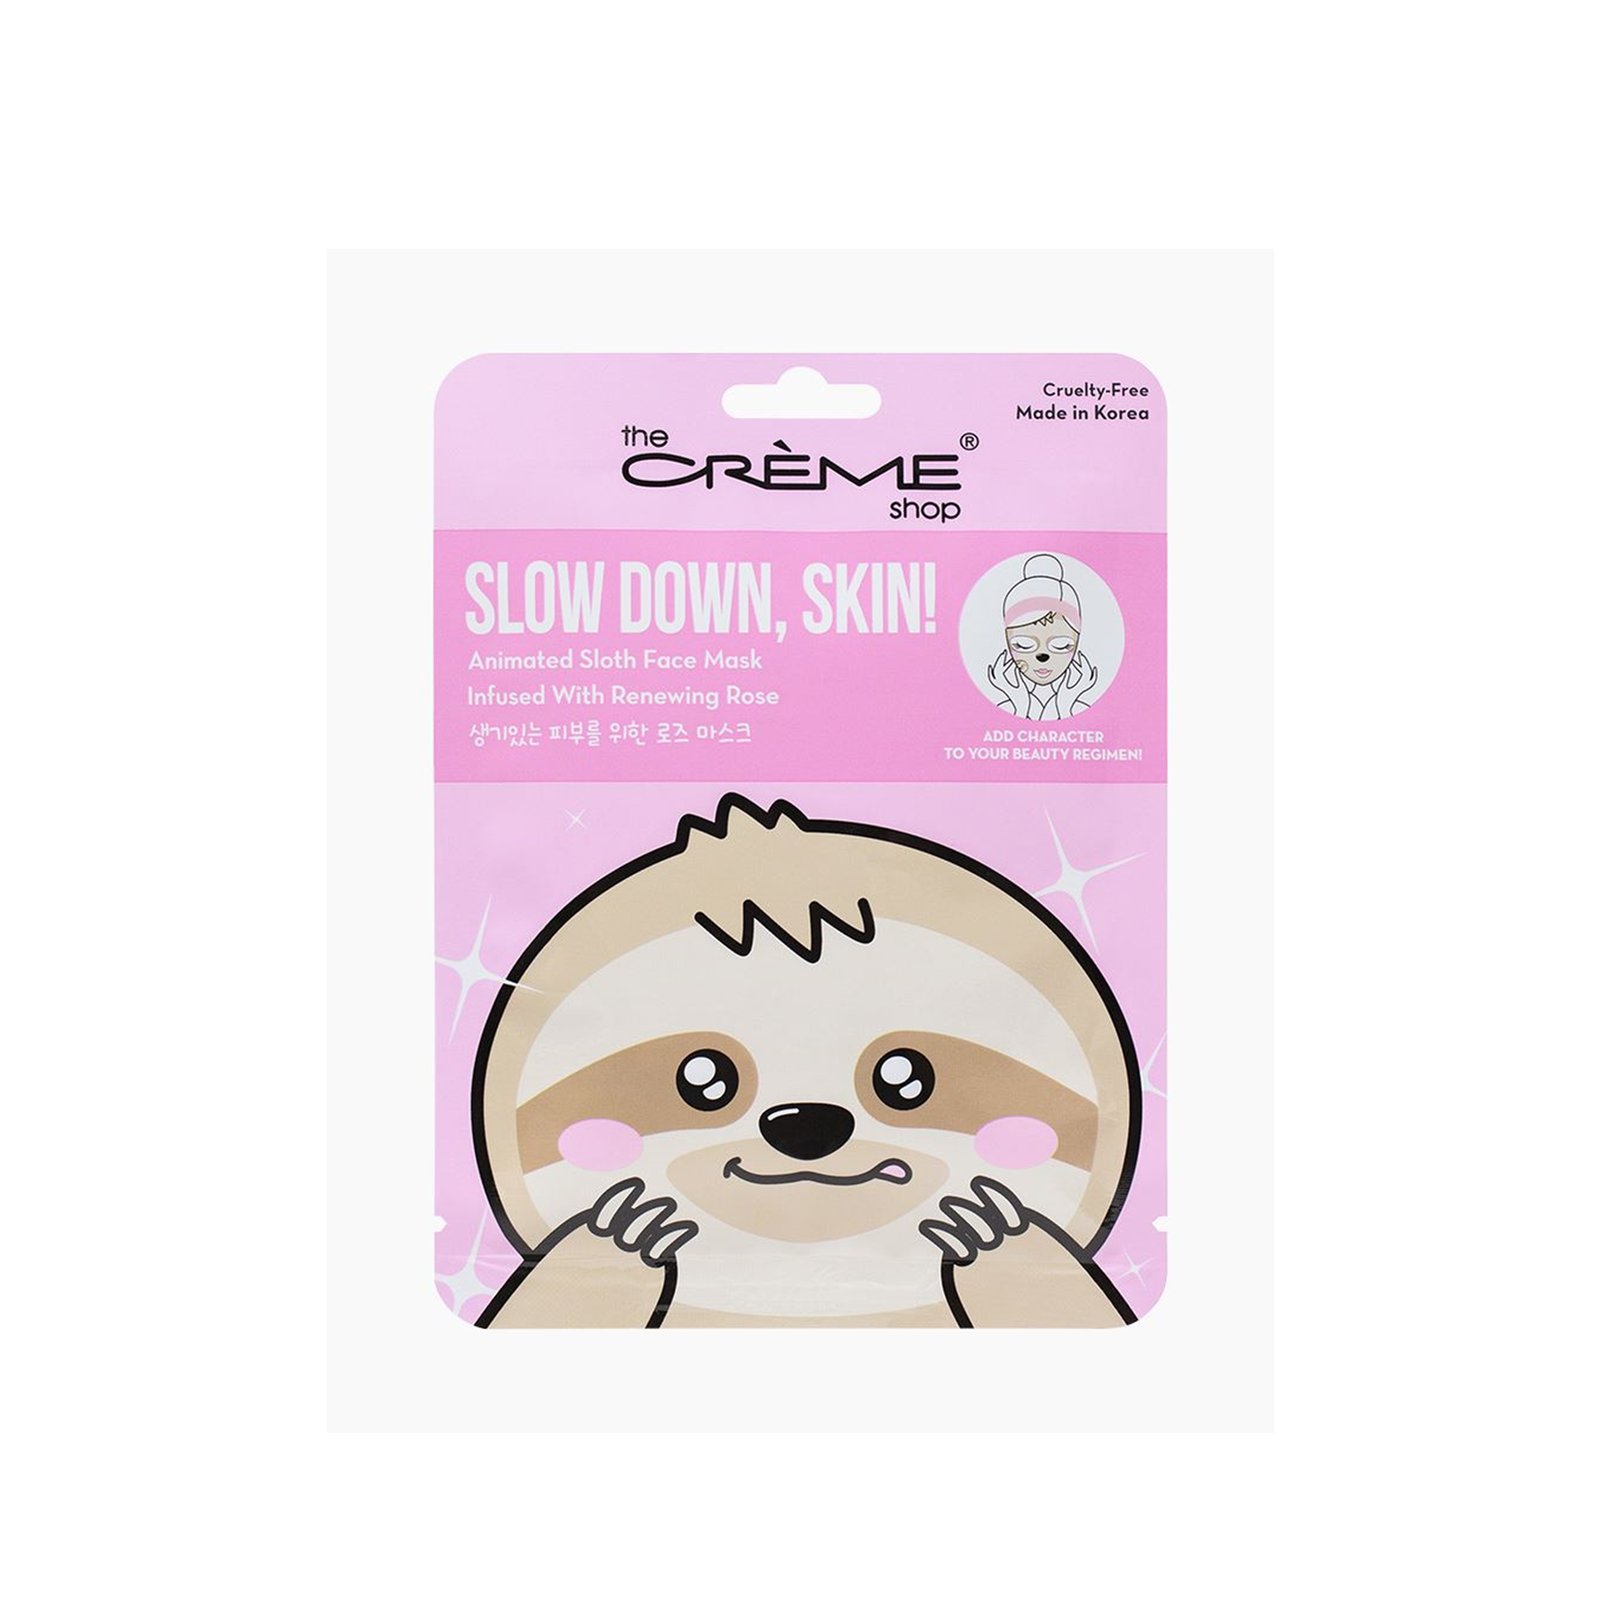 The Crème Shop Slow Down, Skin! Animated Sloth Face Mask 25g (0.88 oz)